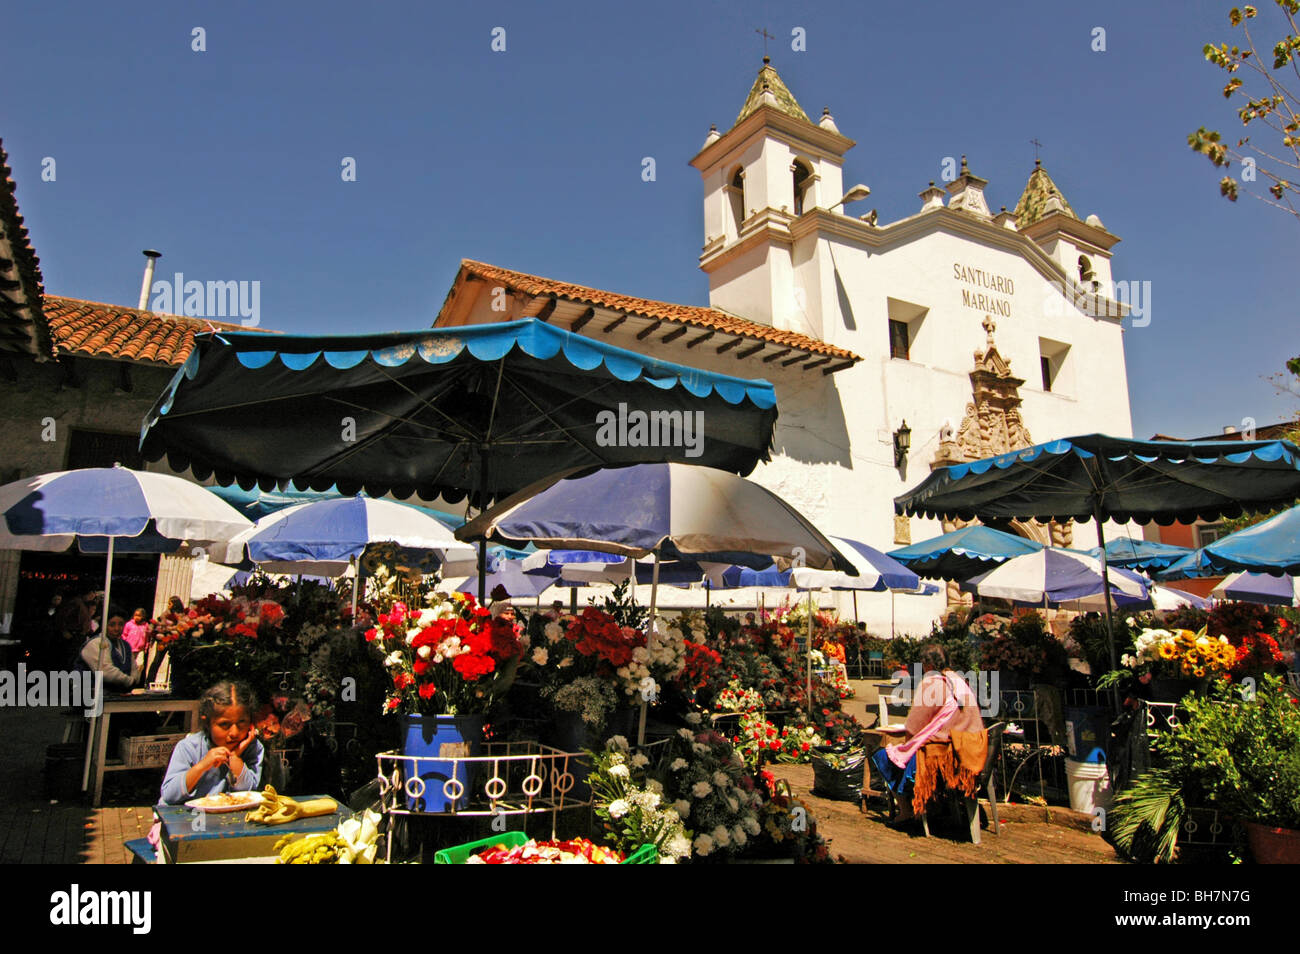 Ecuador, Cuenca, view of a flower market under the shade of sun umbrellas on the place in front of the white Monastery of El Car Stock Photo